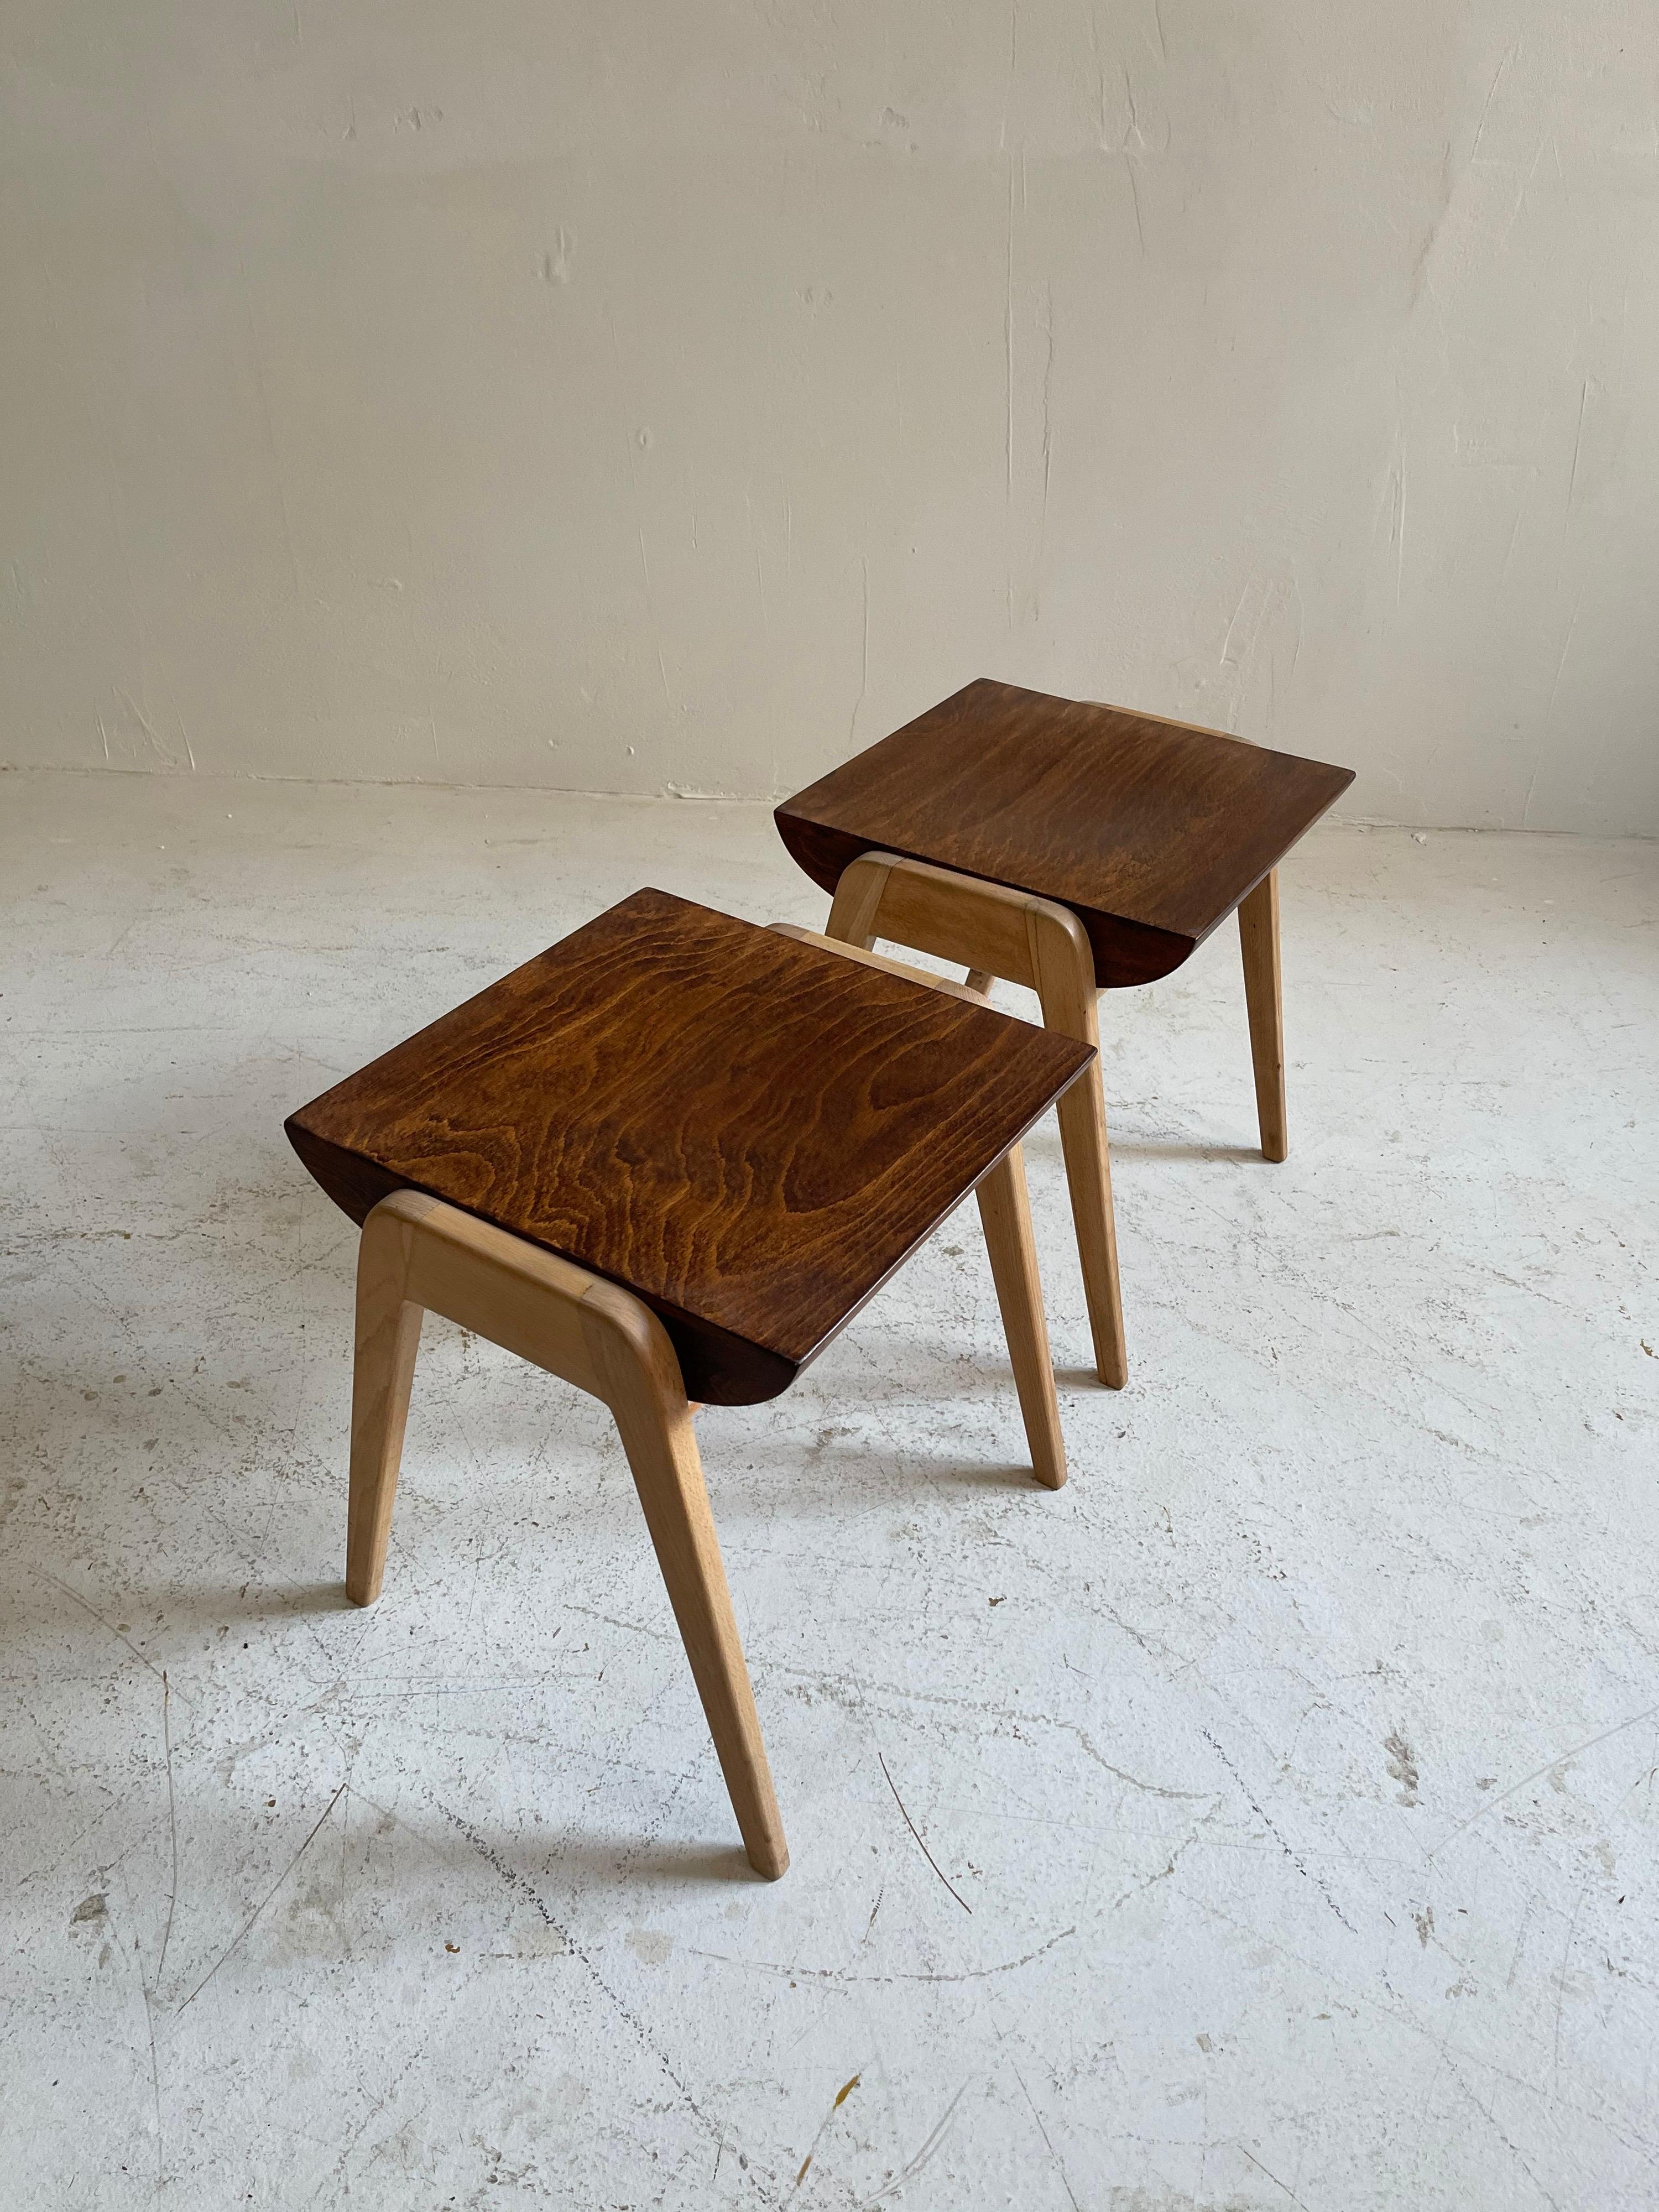 Franz Schuster Model 'Maestro' Dining Room Chairs & Stools, Austria, 1950s For Sale 6